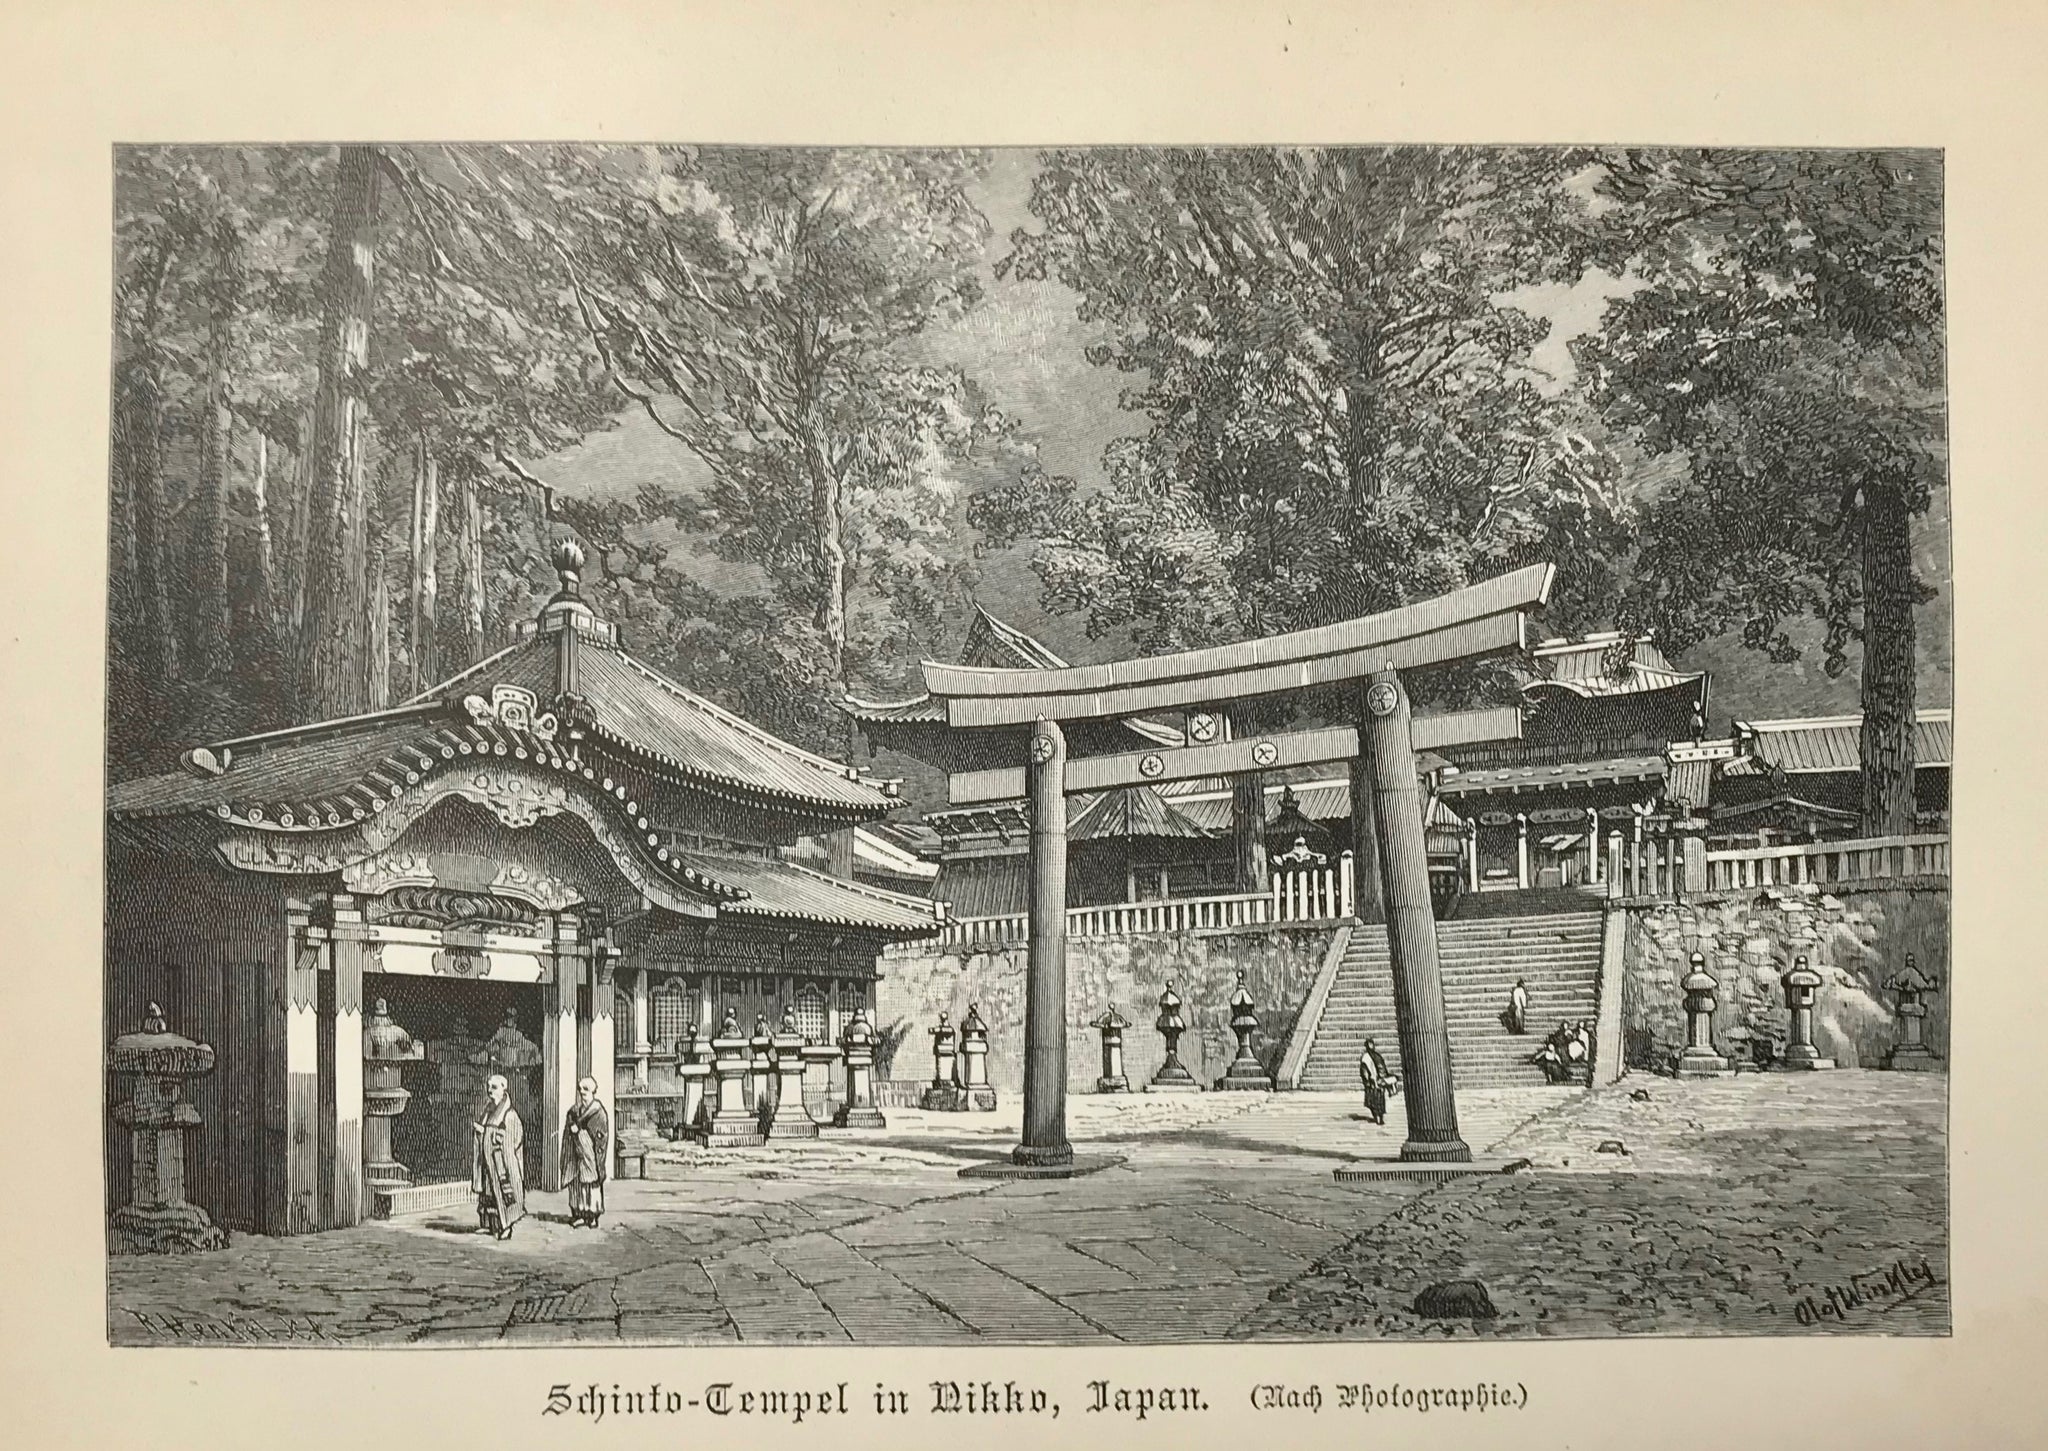 Japan, "Shinto-Tmpel in Nikko, Japan" Wood engraving made after a photograph ca 1900. Very light age toning.